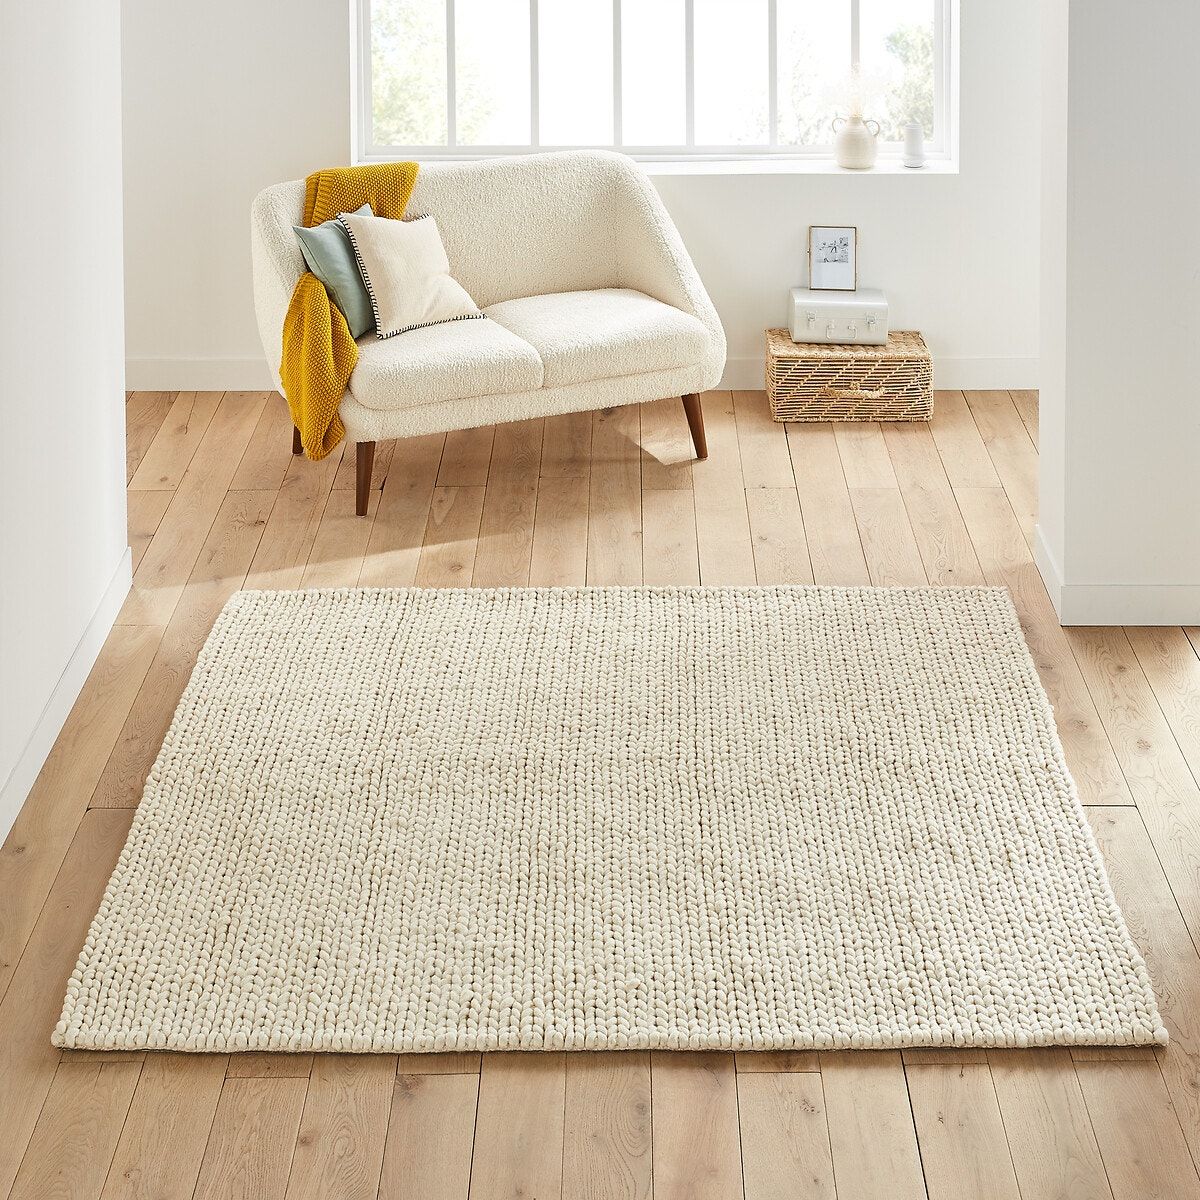 Diano Knit Effect Square 100% Wool Rug La Redoute Interieurs | La Redoute Regarding Square Rugs (View 3 of 15)